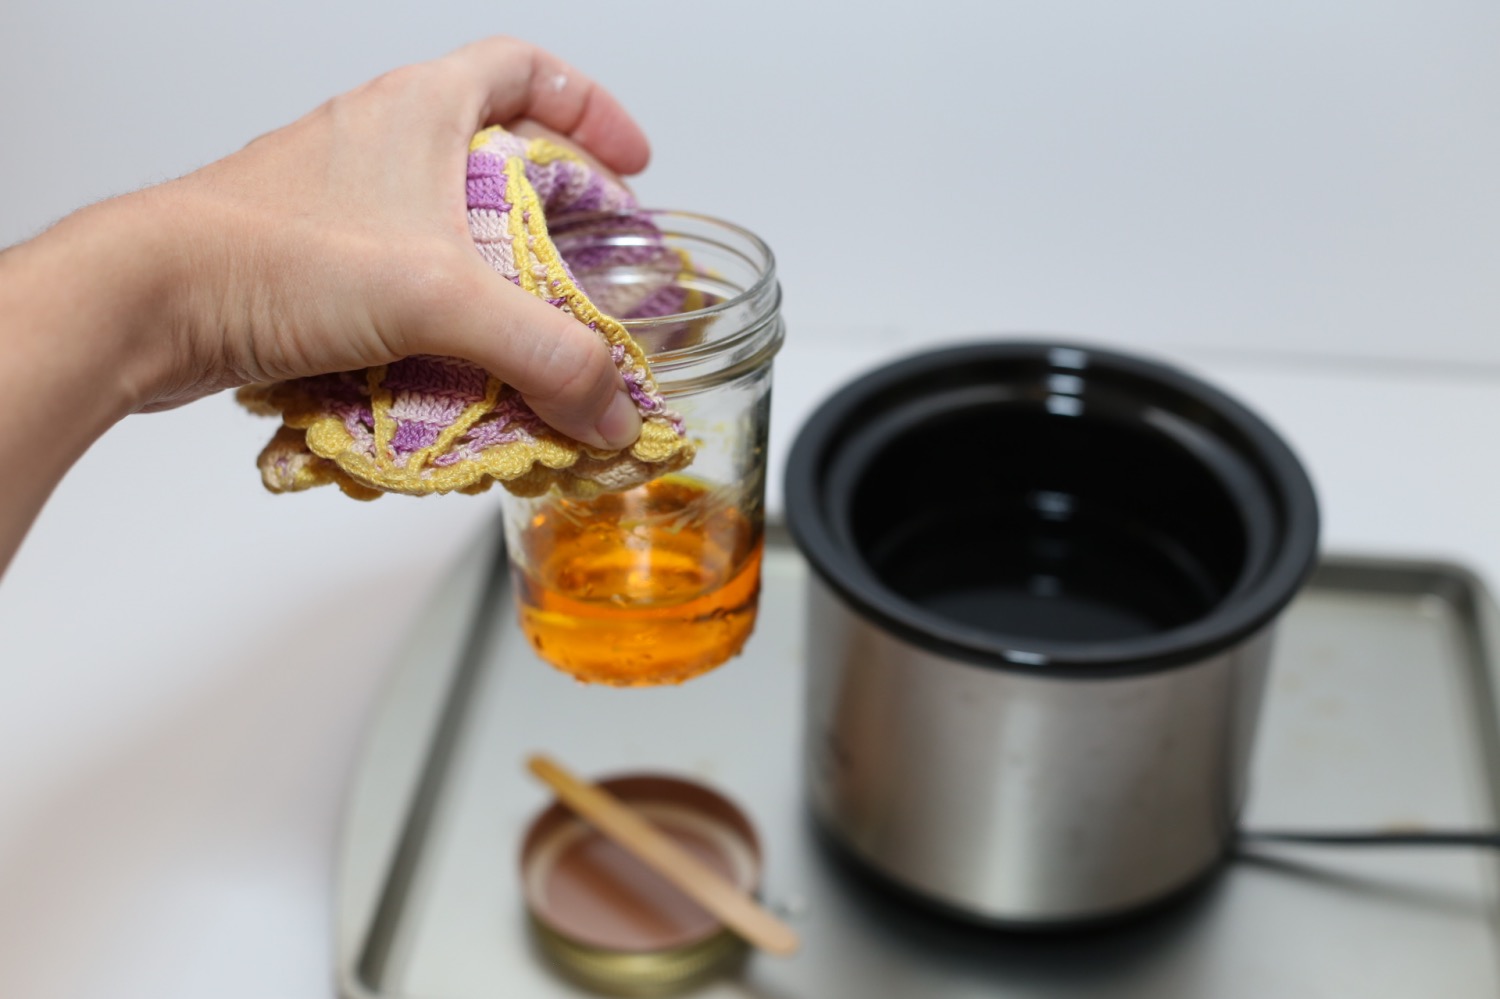 remove the mason jar and wax from the heat